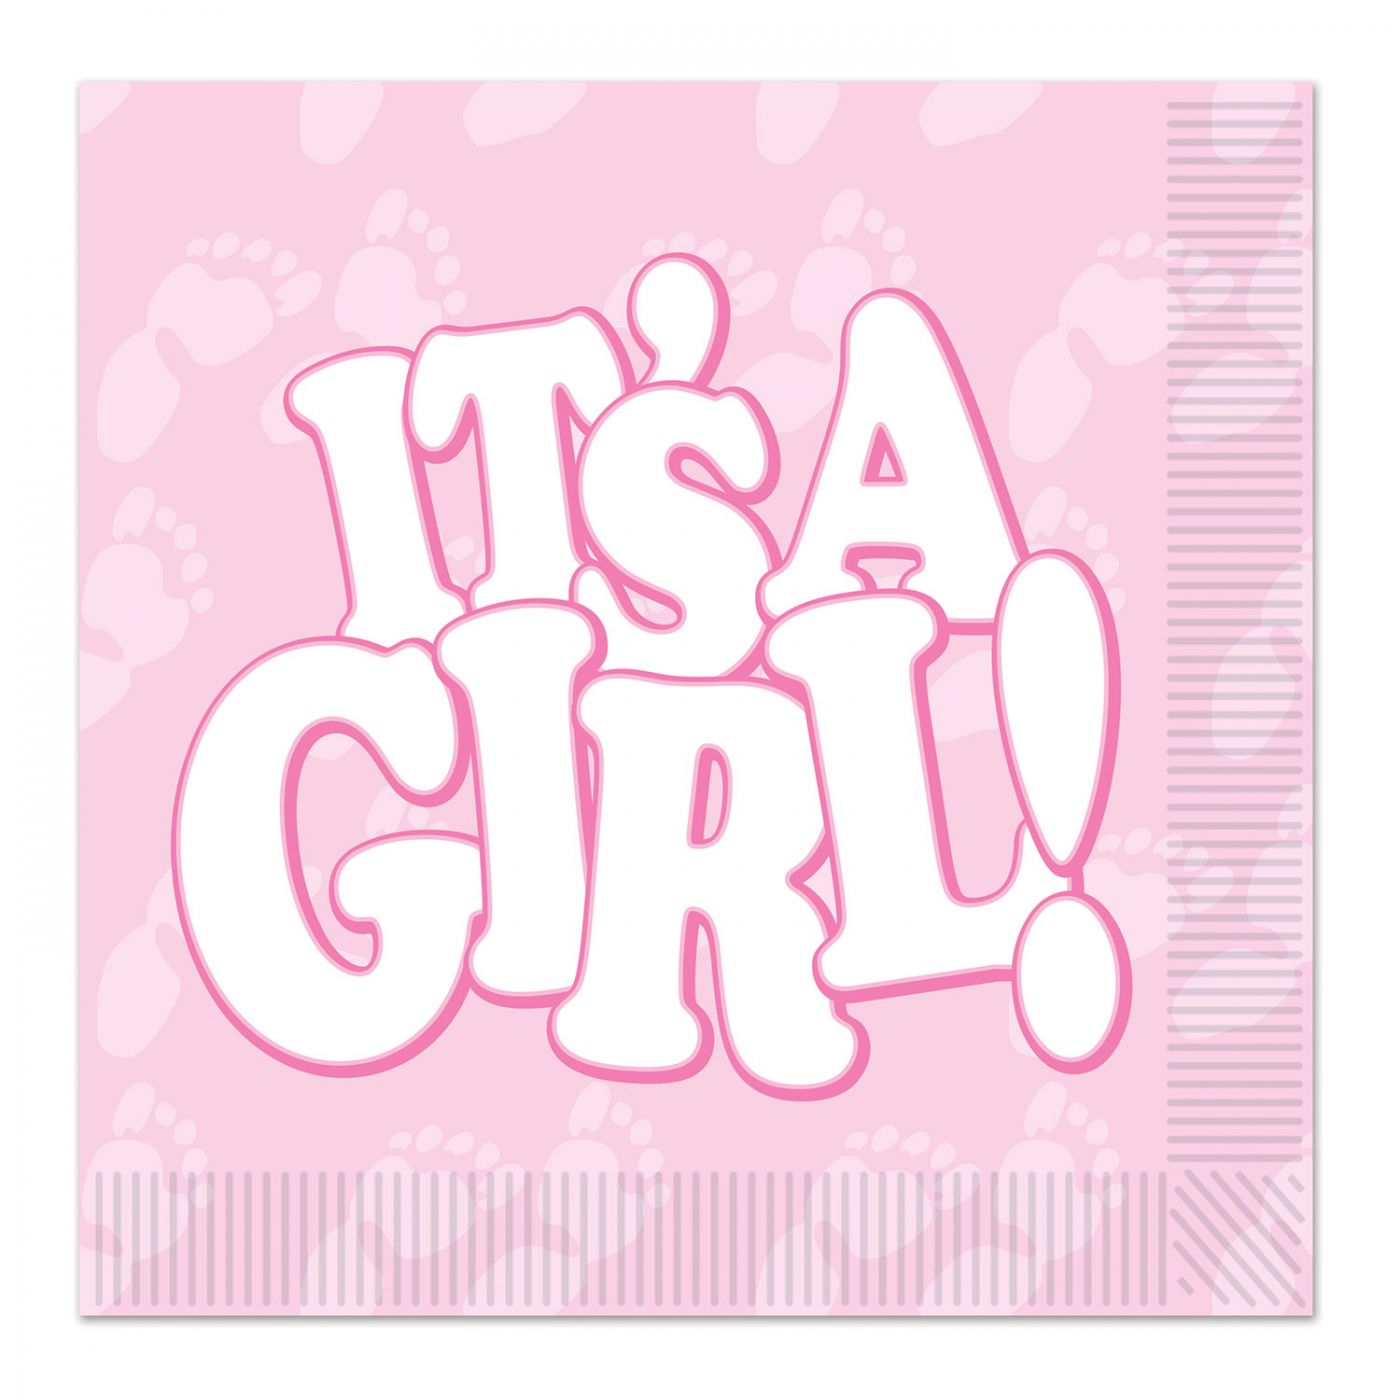 It's A Girl! Luncheon Napkins (12) image